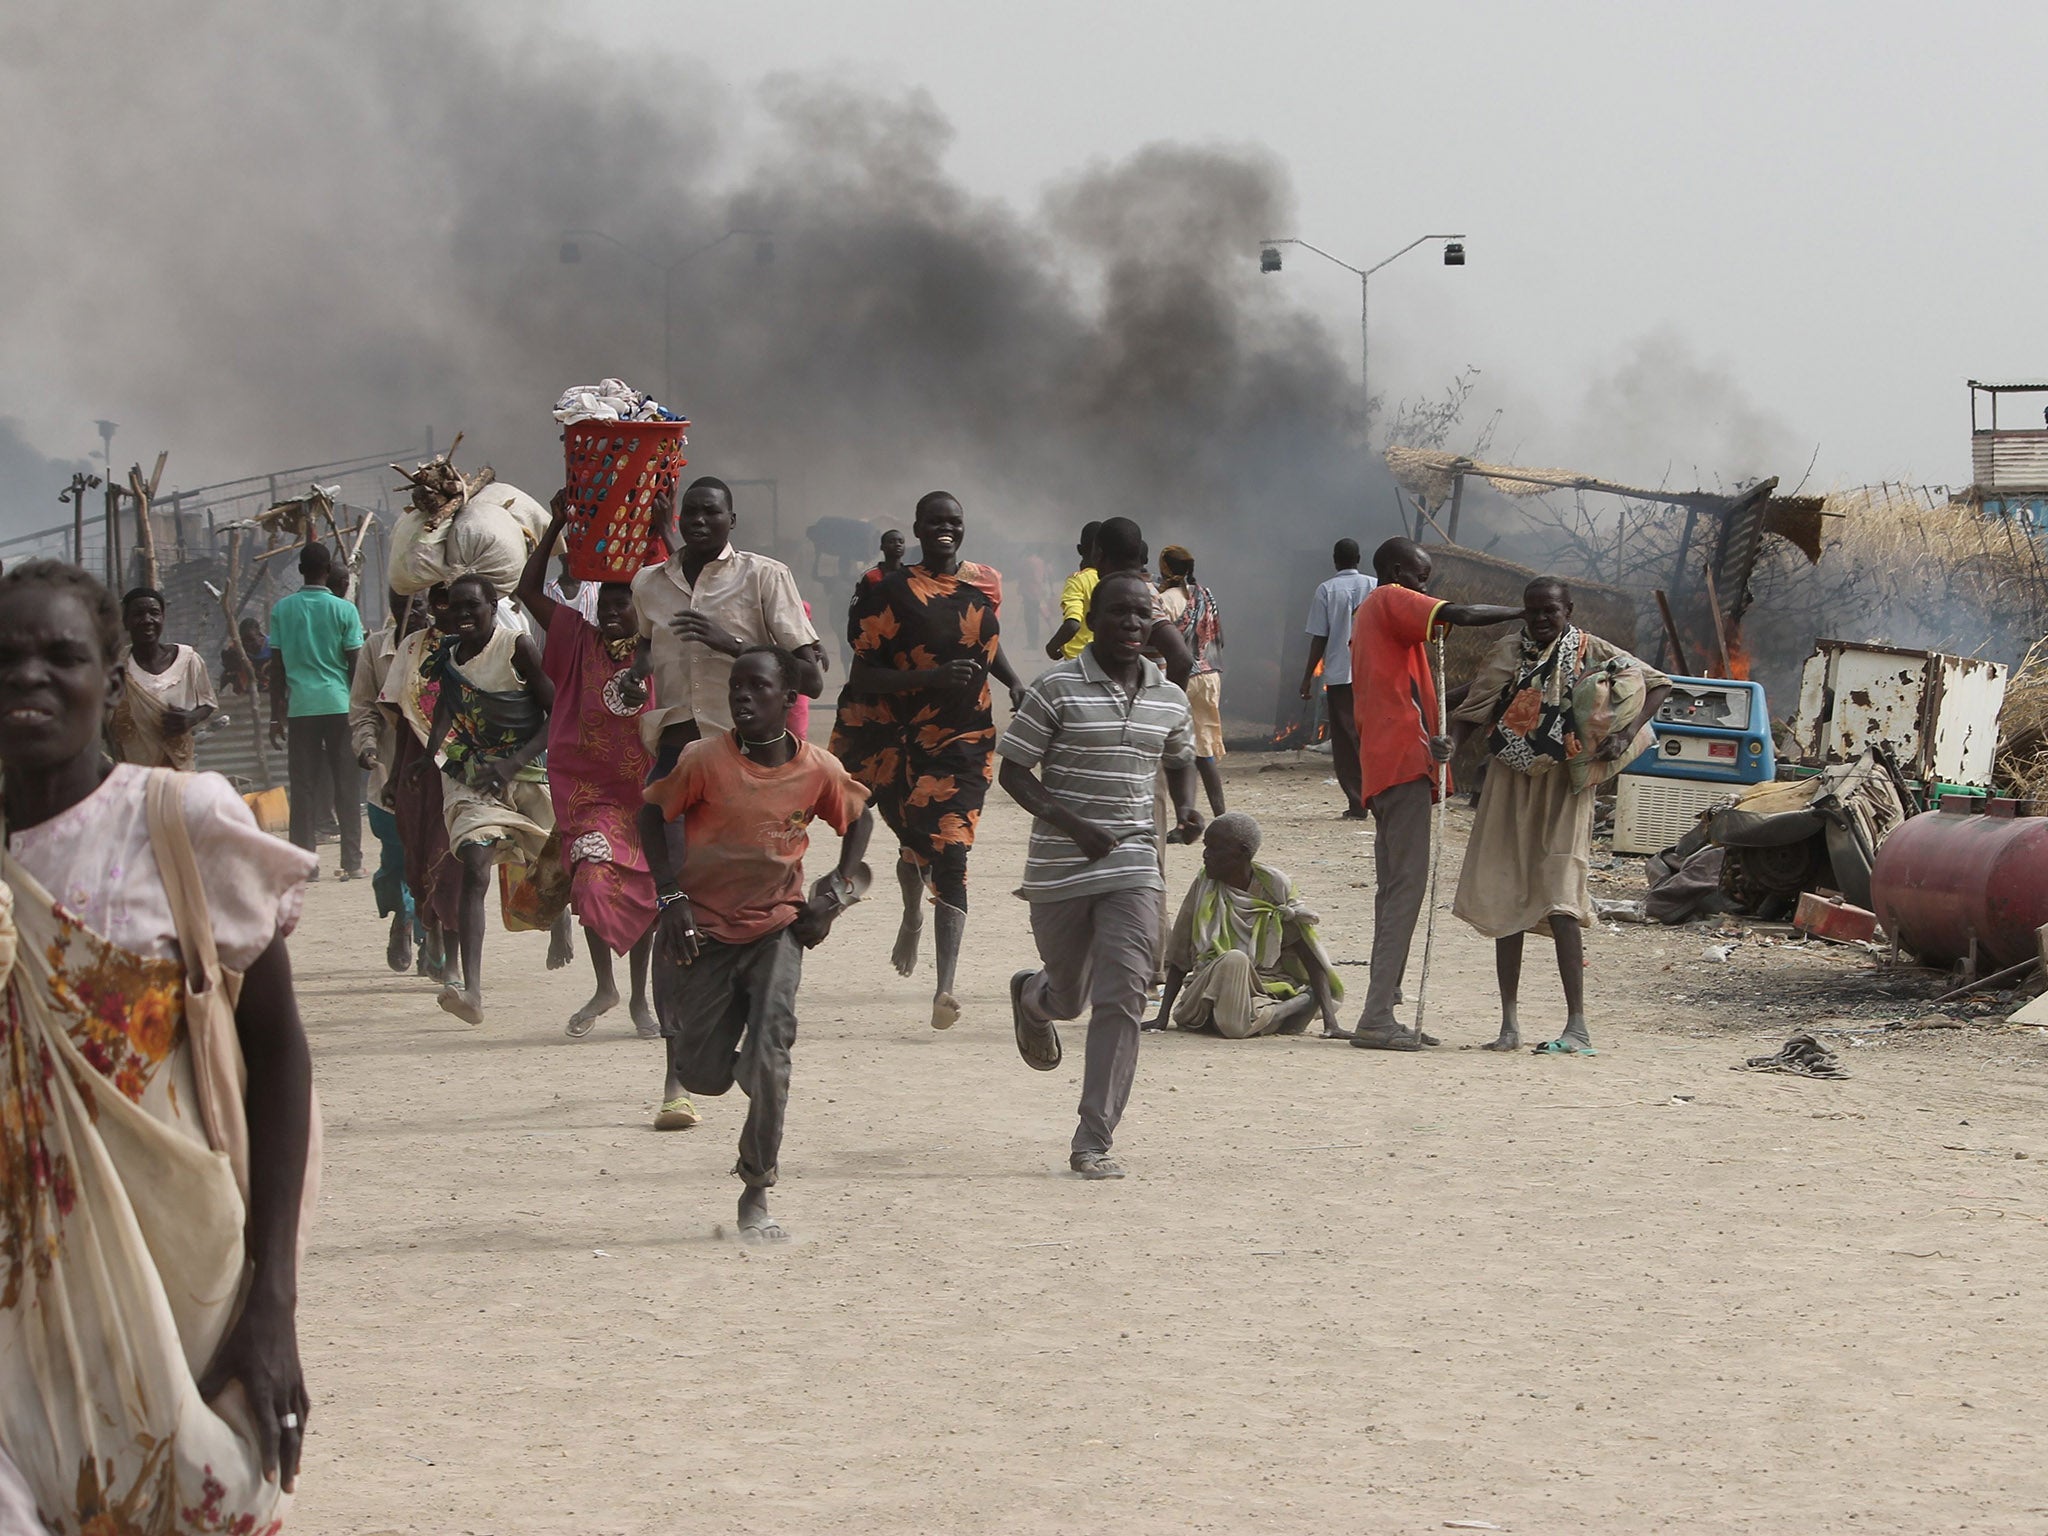 Refugees flee from clashes between ethnic groups in the Malakal refugee camp in South Sudan